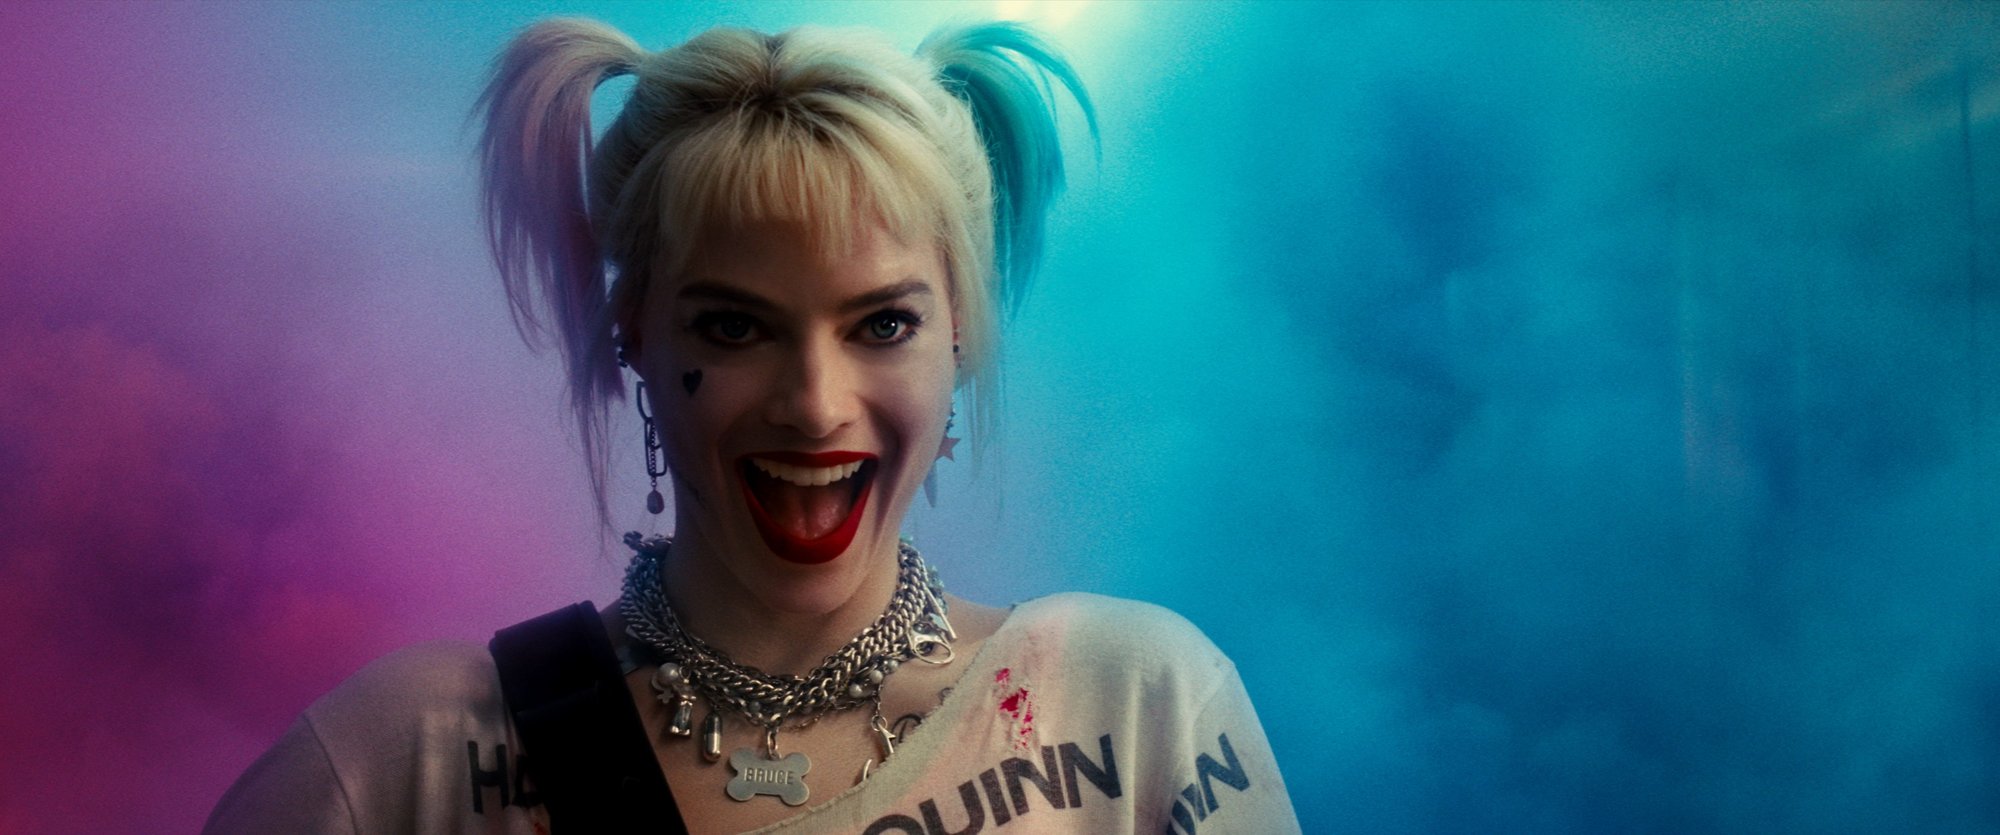 Margot Robbie stars as Harley Quinn in Warner Bros. Pictures' Birds of Prey: And the Fantabulous Emancipation of One Harley Quinn (2020)